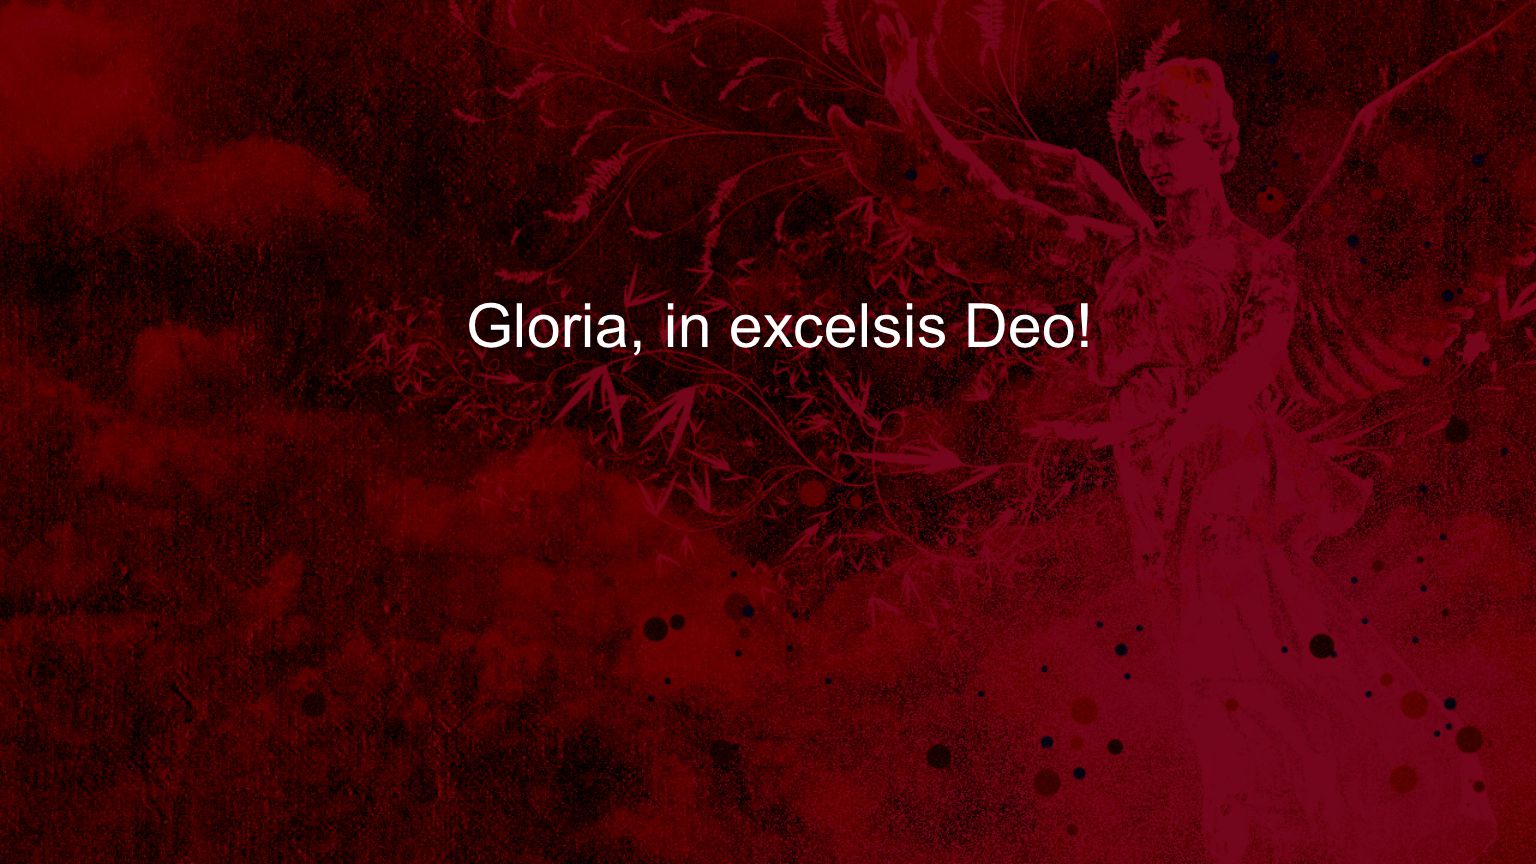 Gloria, in excelsis Deo!